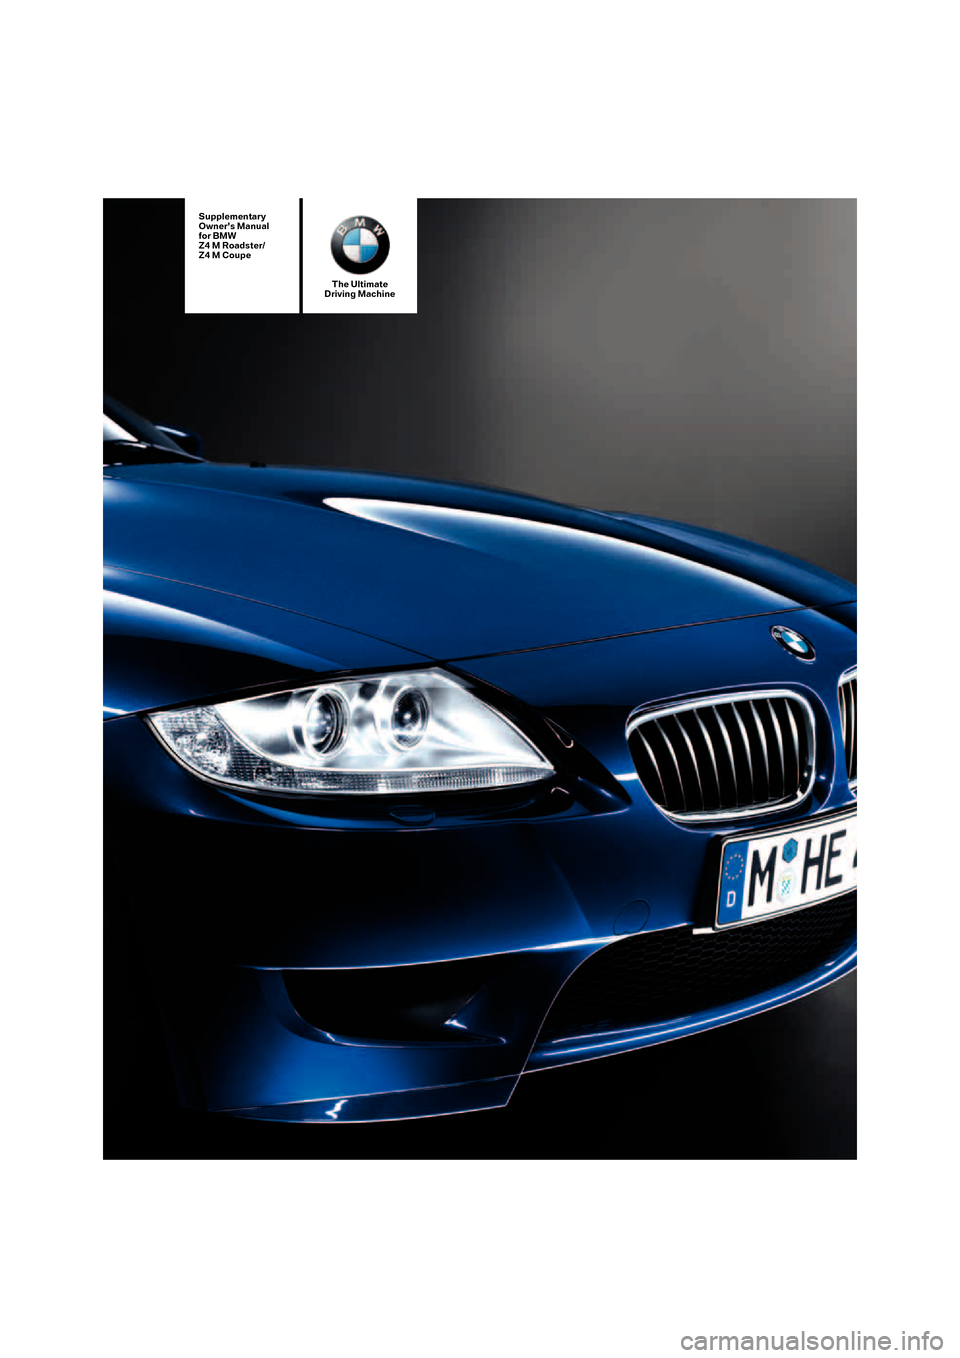 BMW Z4M COUPE 2007 E86 Owners Manual The Ultimate
Driving Machine
Supplementary
Owners Manual
for BMW
Z4 M Roadster/
Z4 M Coupe
ba5.book  Seite 1  Mittwoch, 28. Februar 2007  1:09 13 